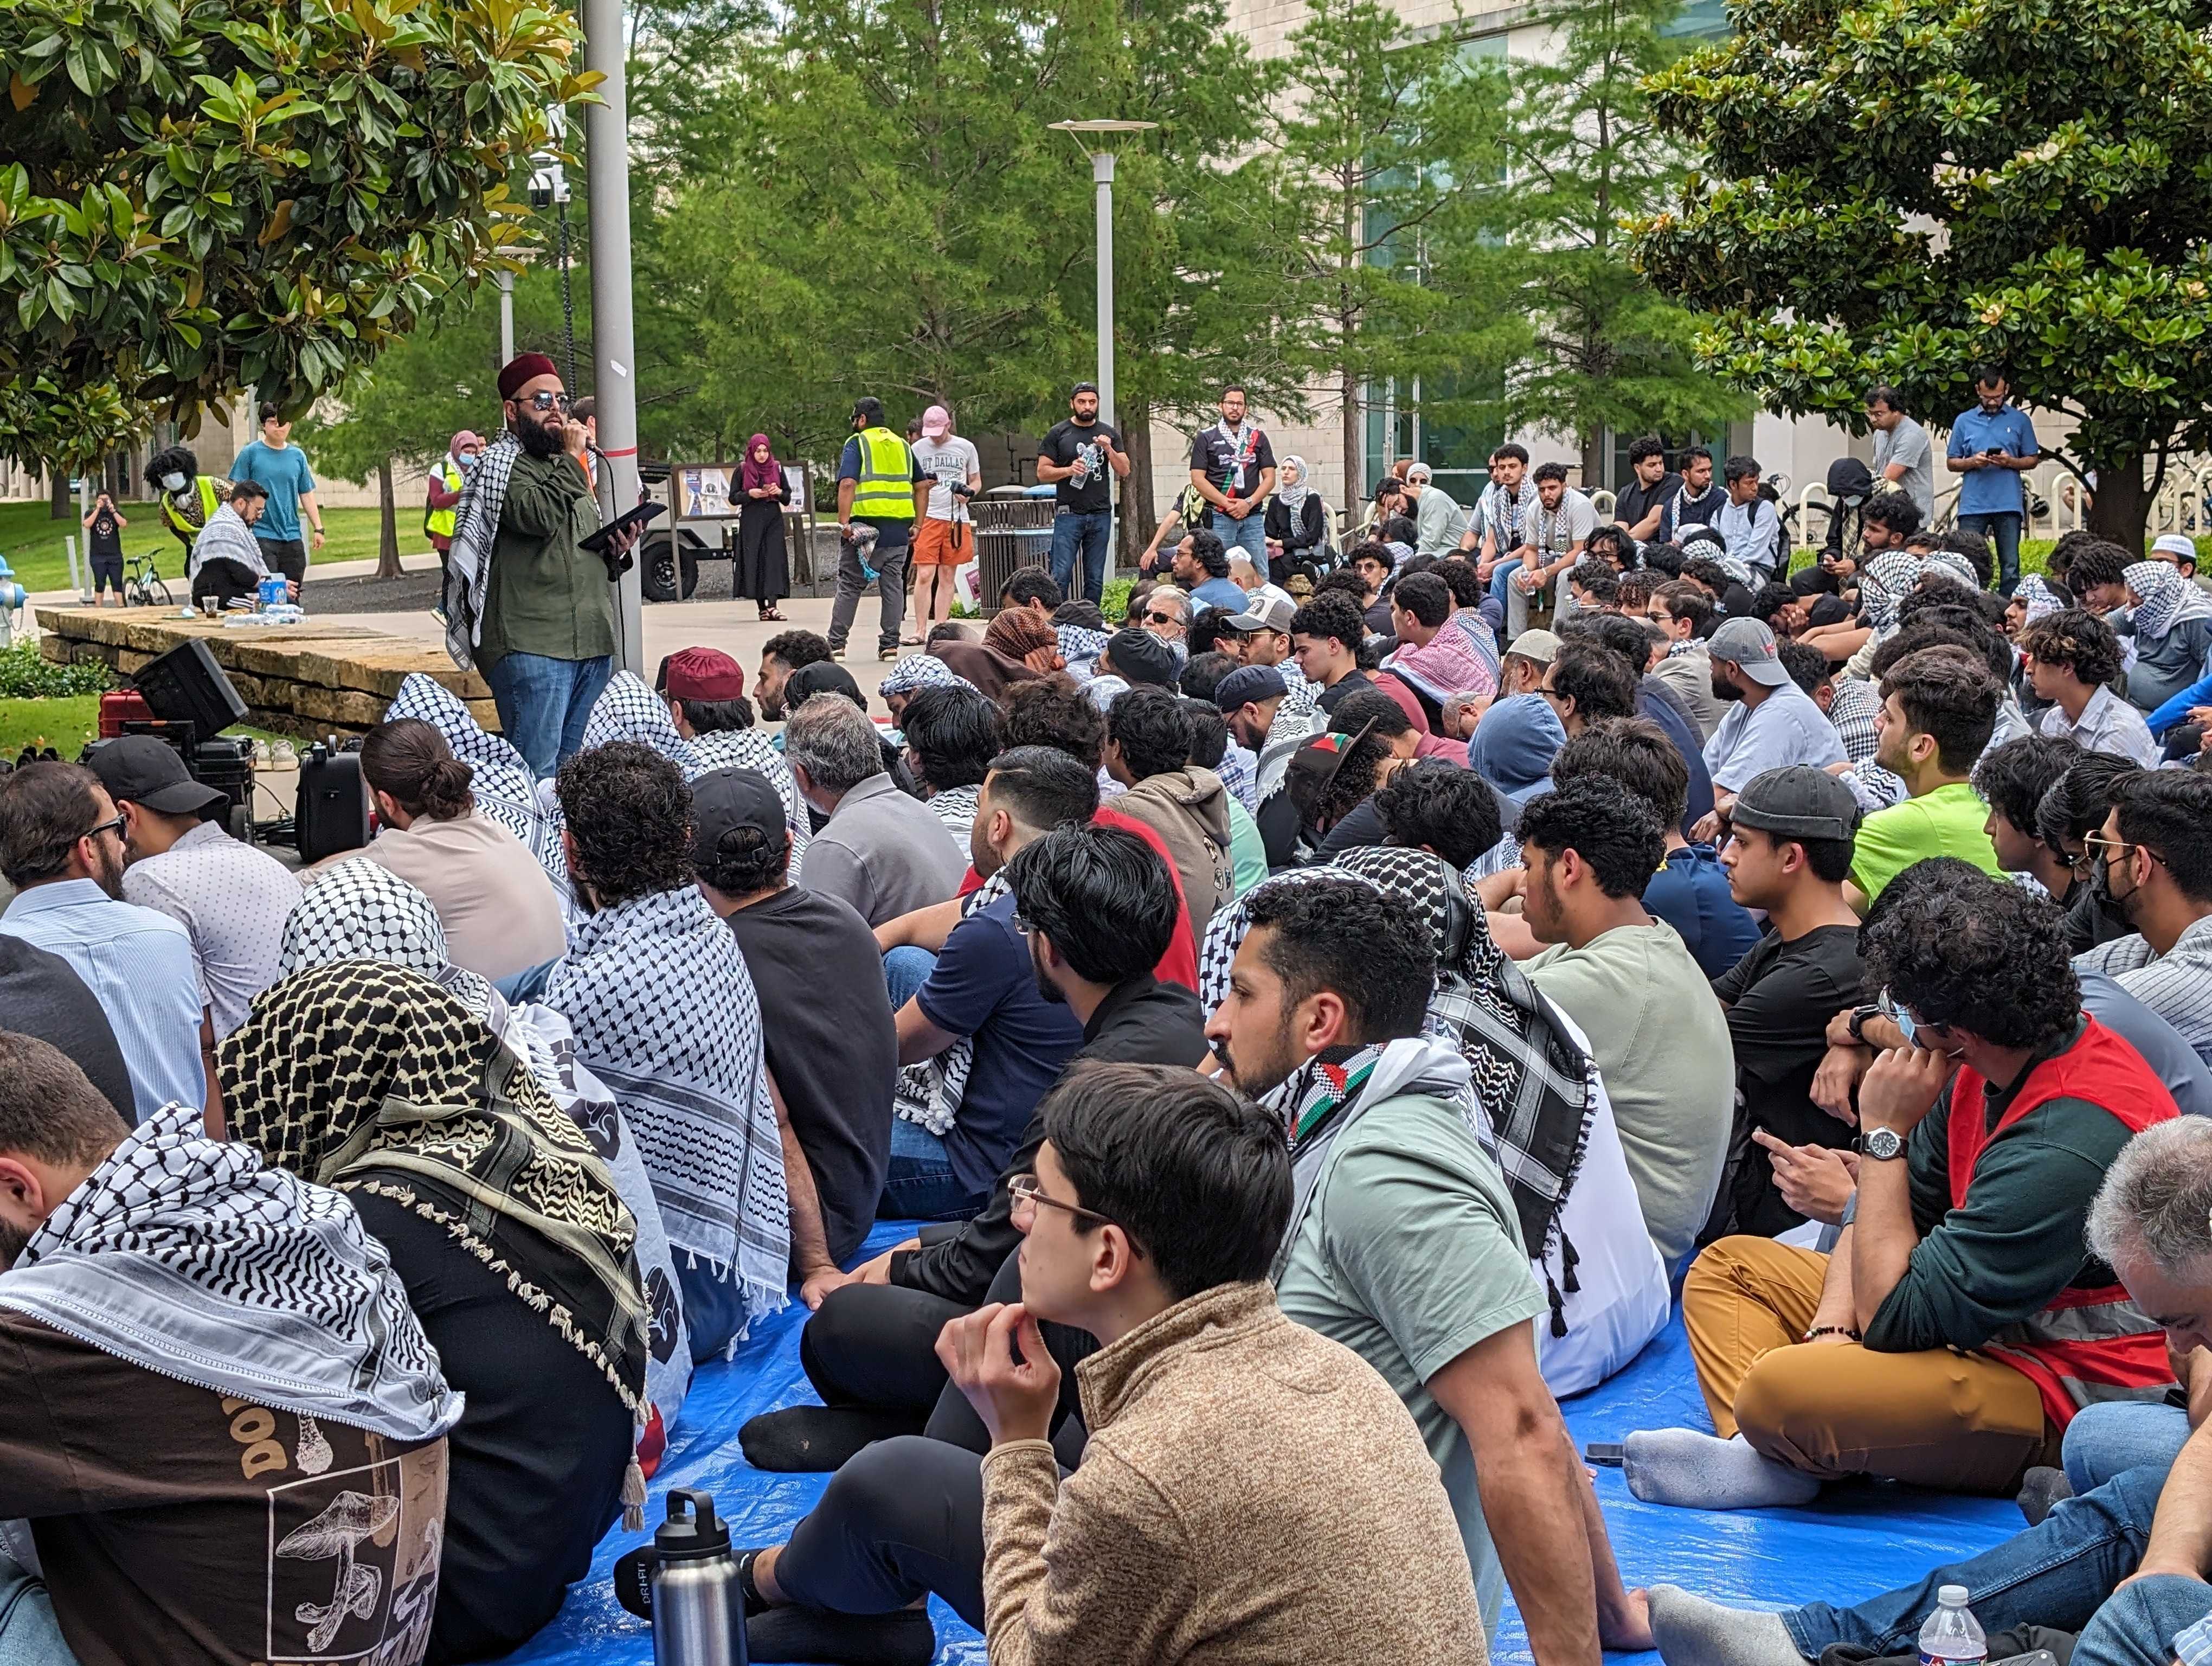 Hundreds of students and others gathered at the University of Texas at Dallas for Jummah,...